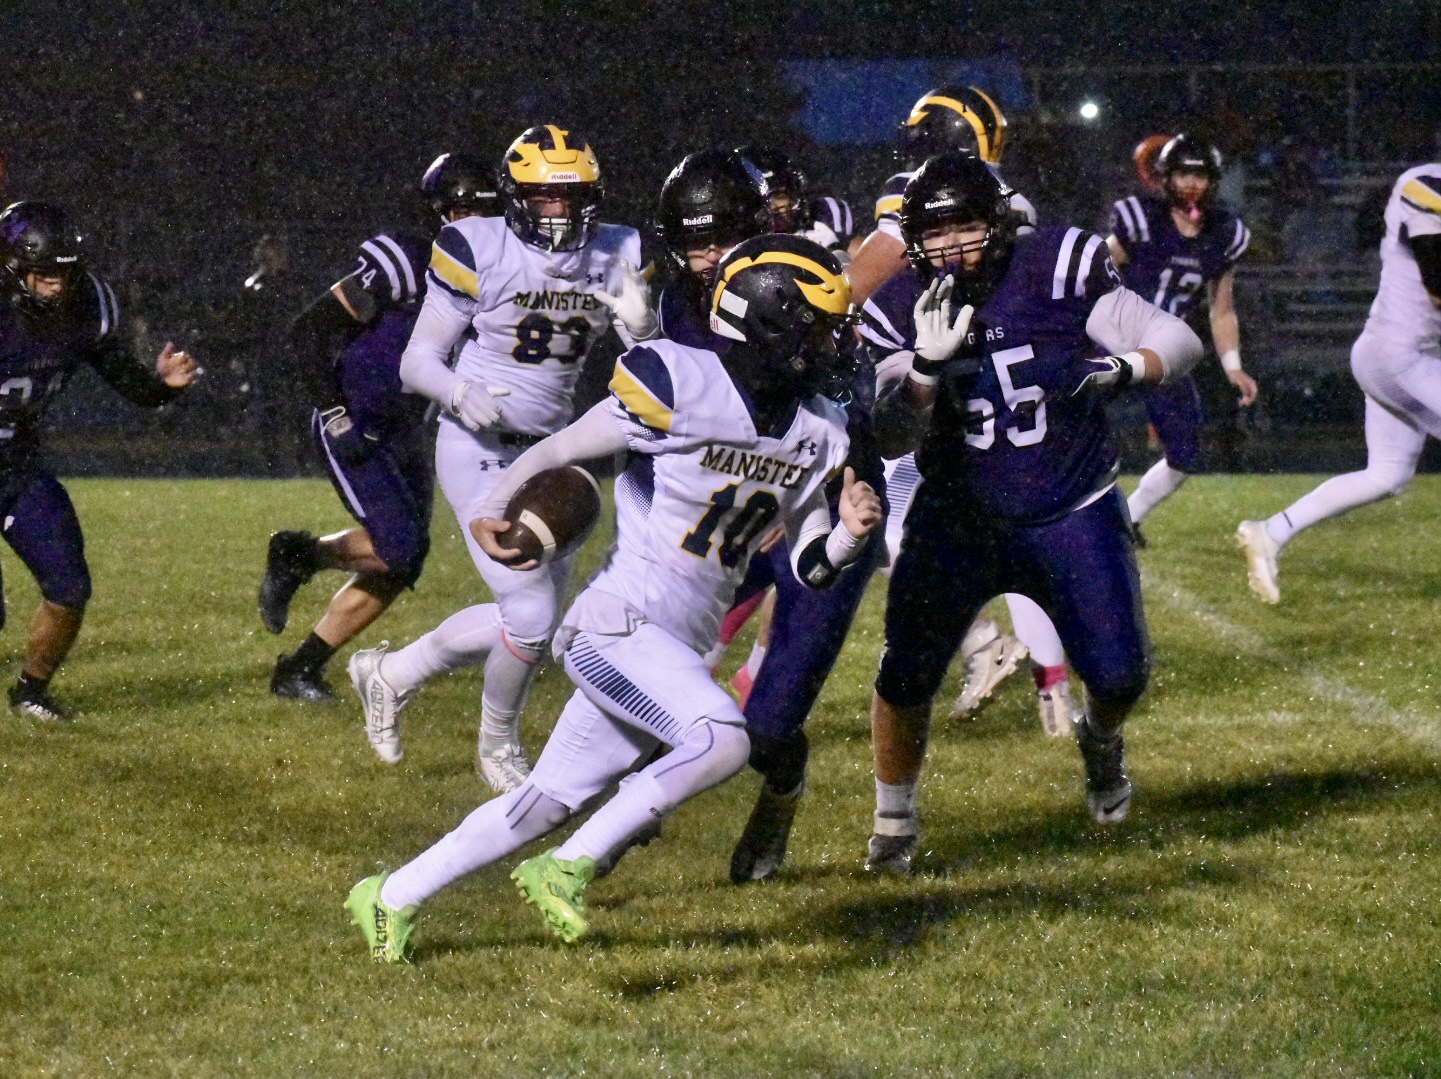 First-half offensive explosion carries Manistee to victory over Shelby